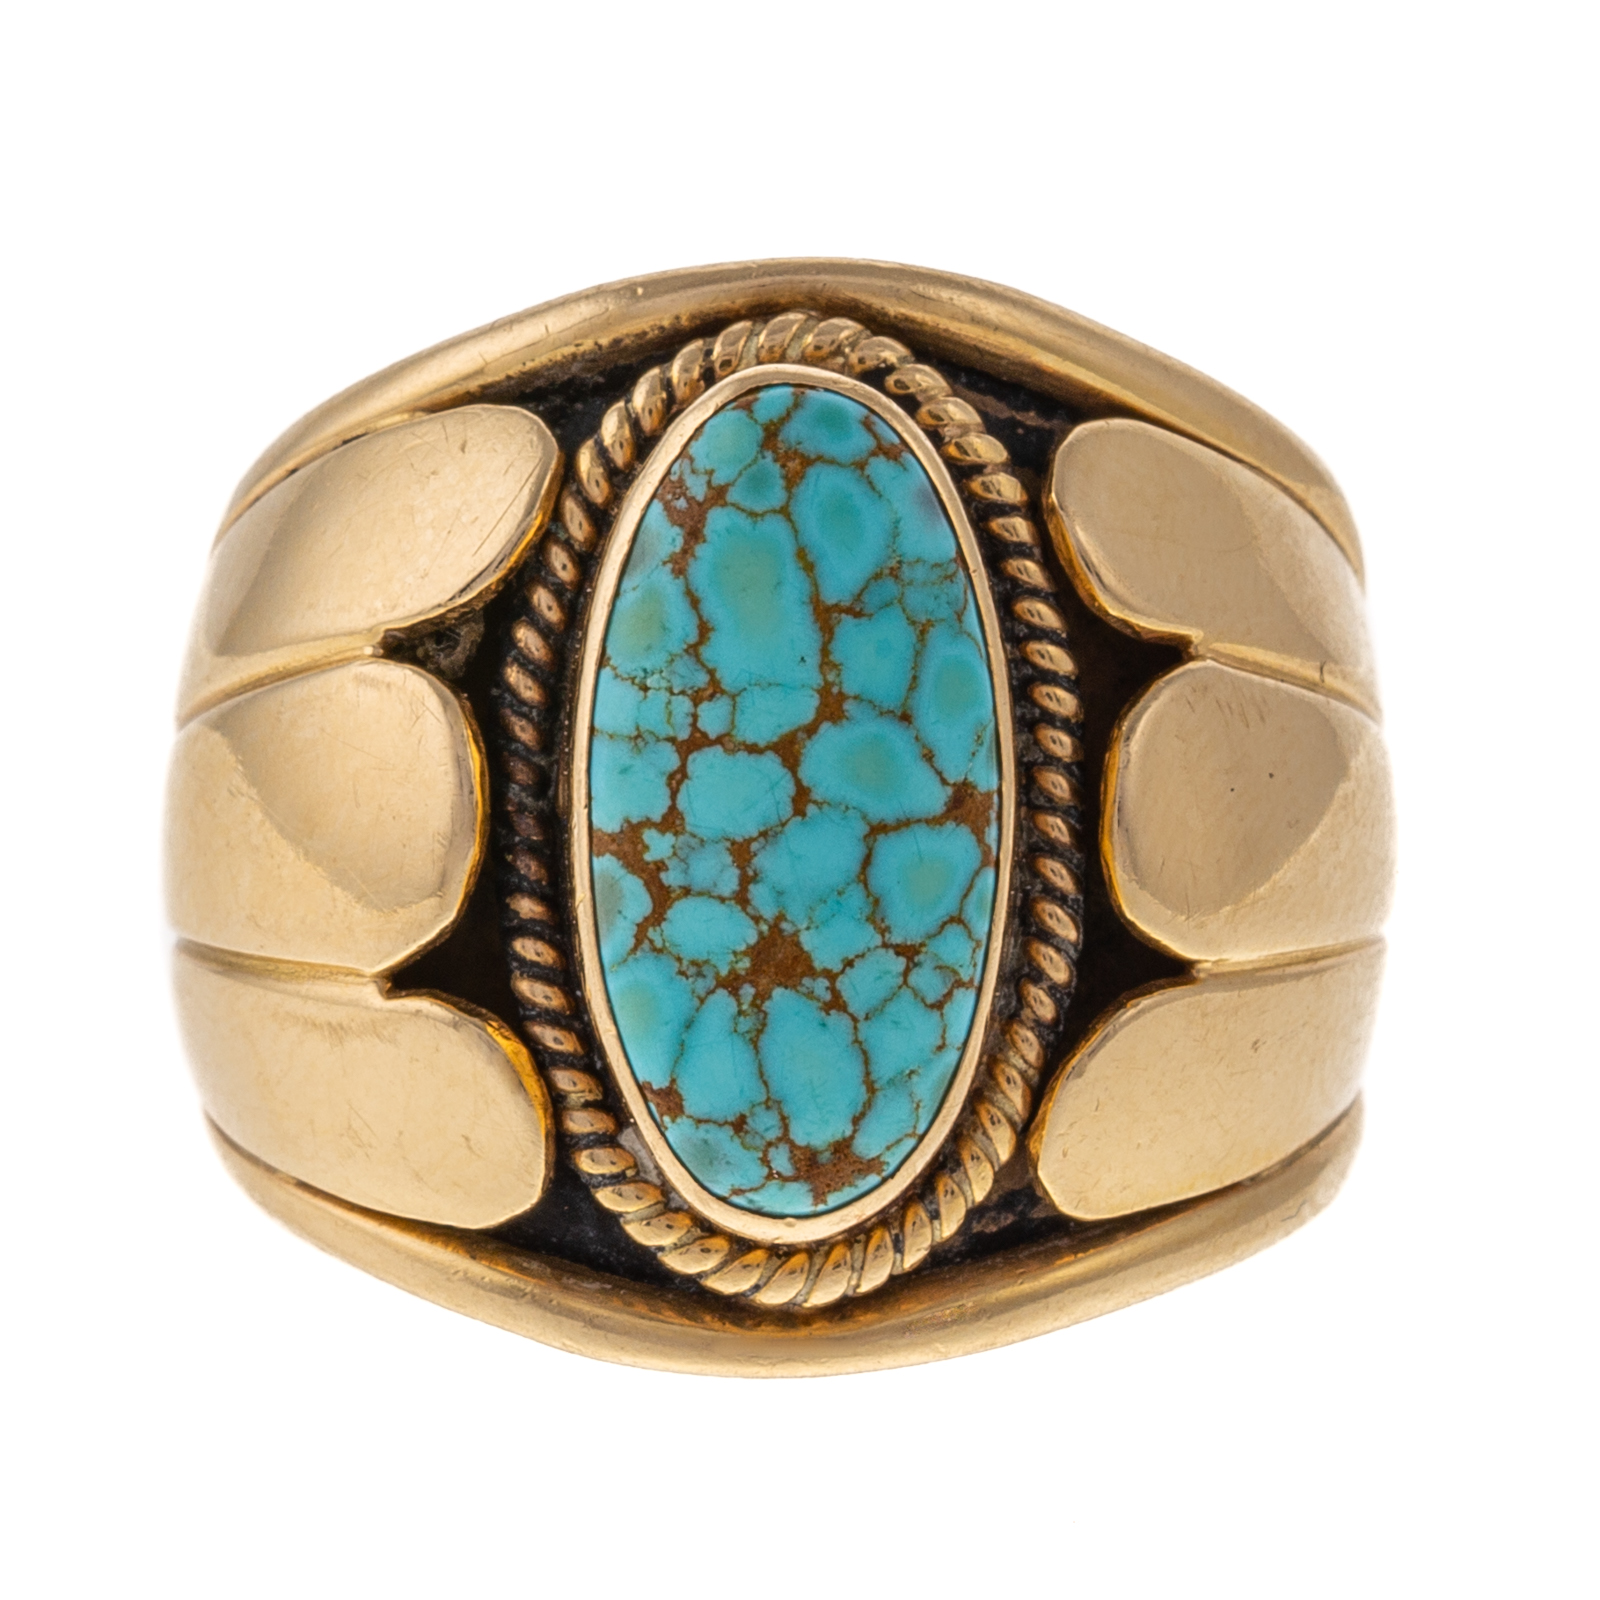 A RARE 14K NAVAJO TURQUOISE RING 29dfb8